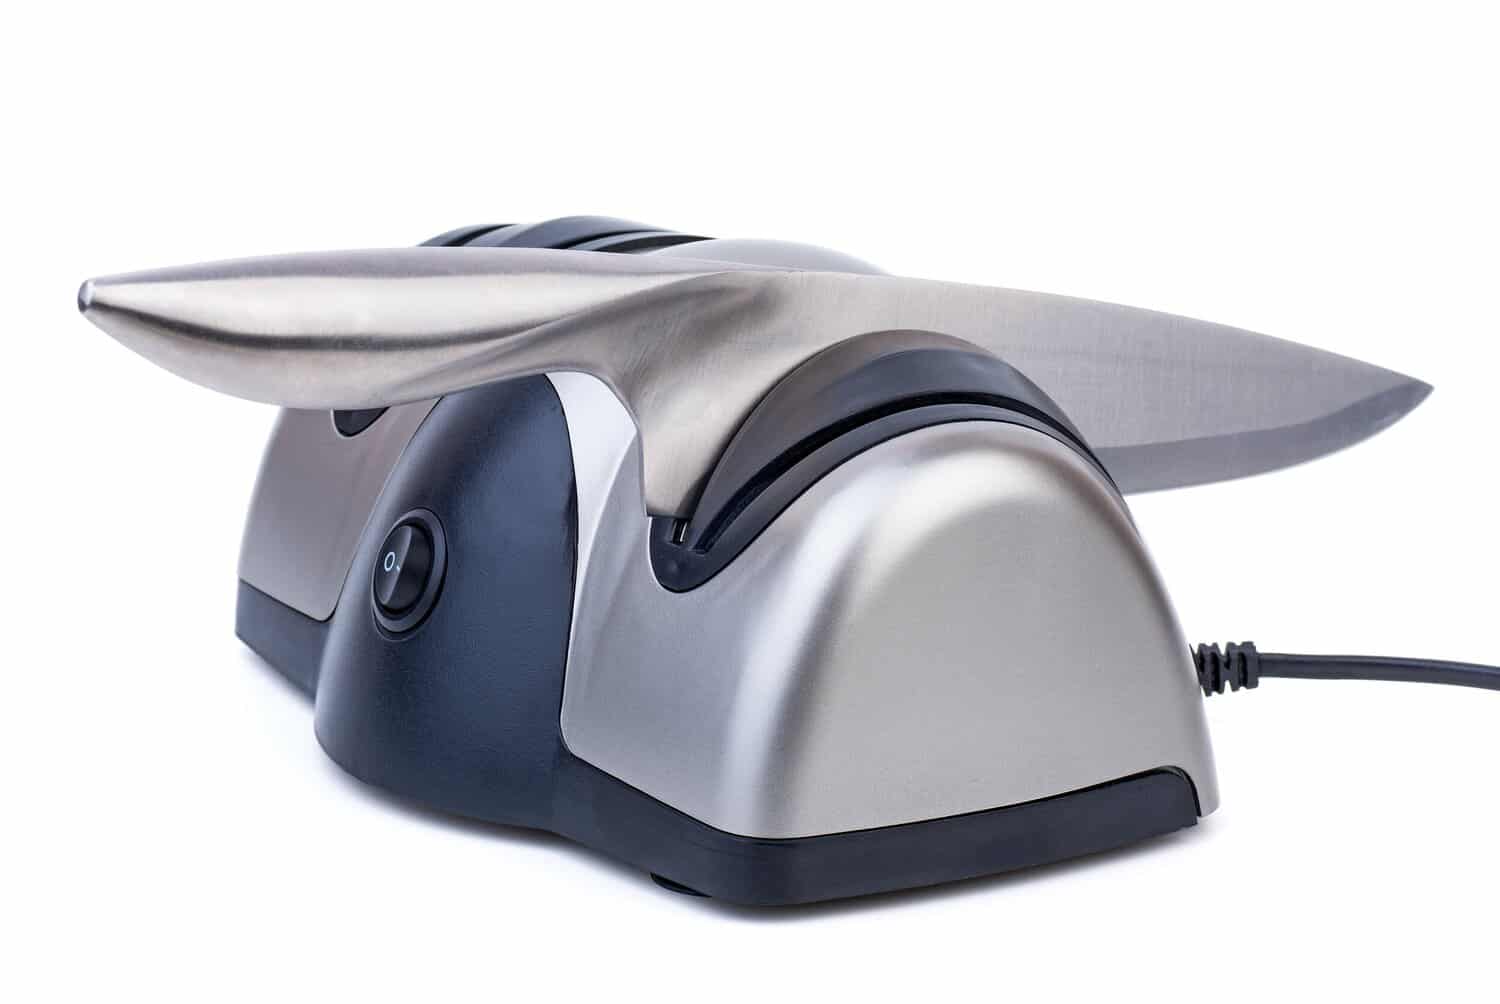 How To Use An Electric Knife Sharpener?